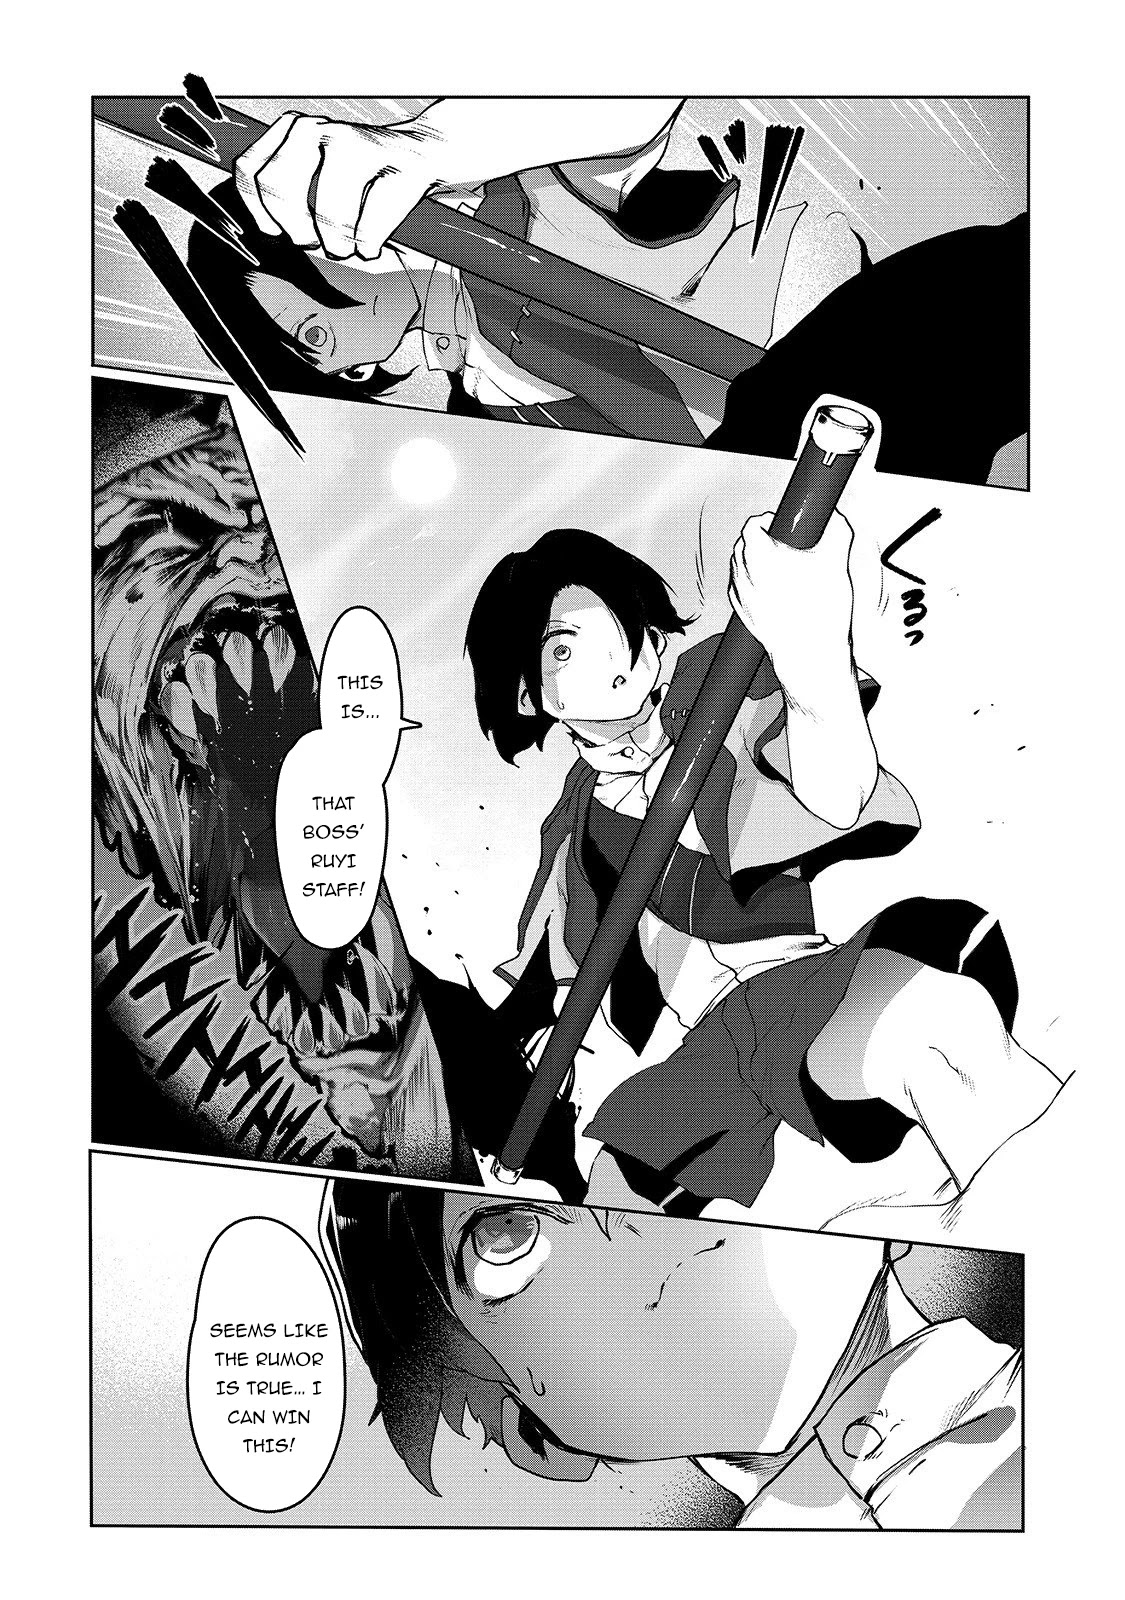 The Useless Tamer Will Turn Into The Top Unconsciously By My Previous Life Knowledge - Page 3